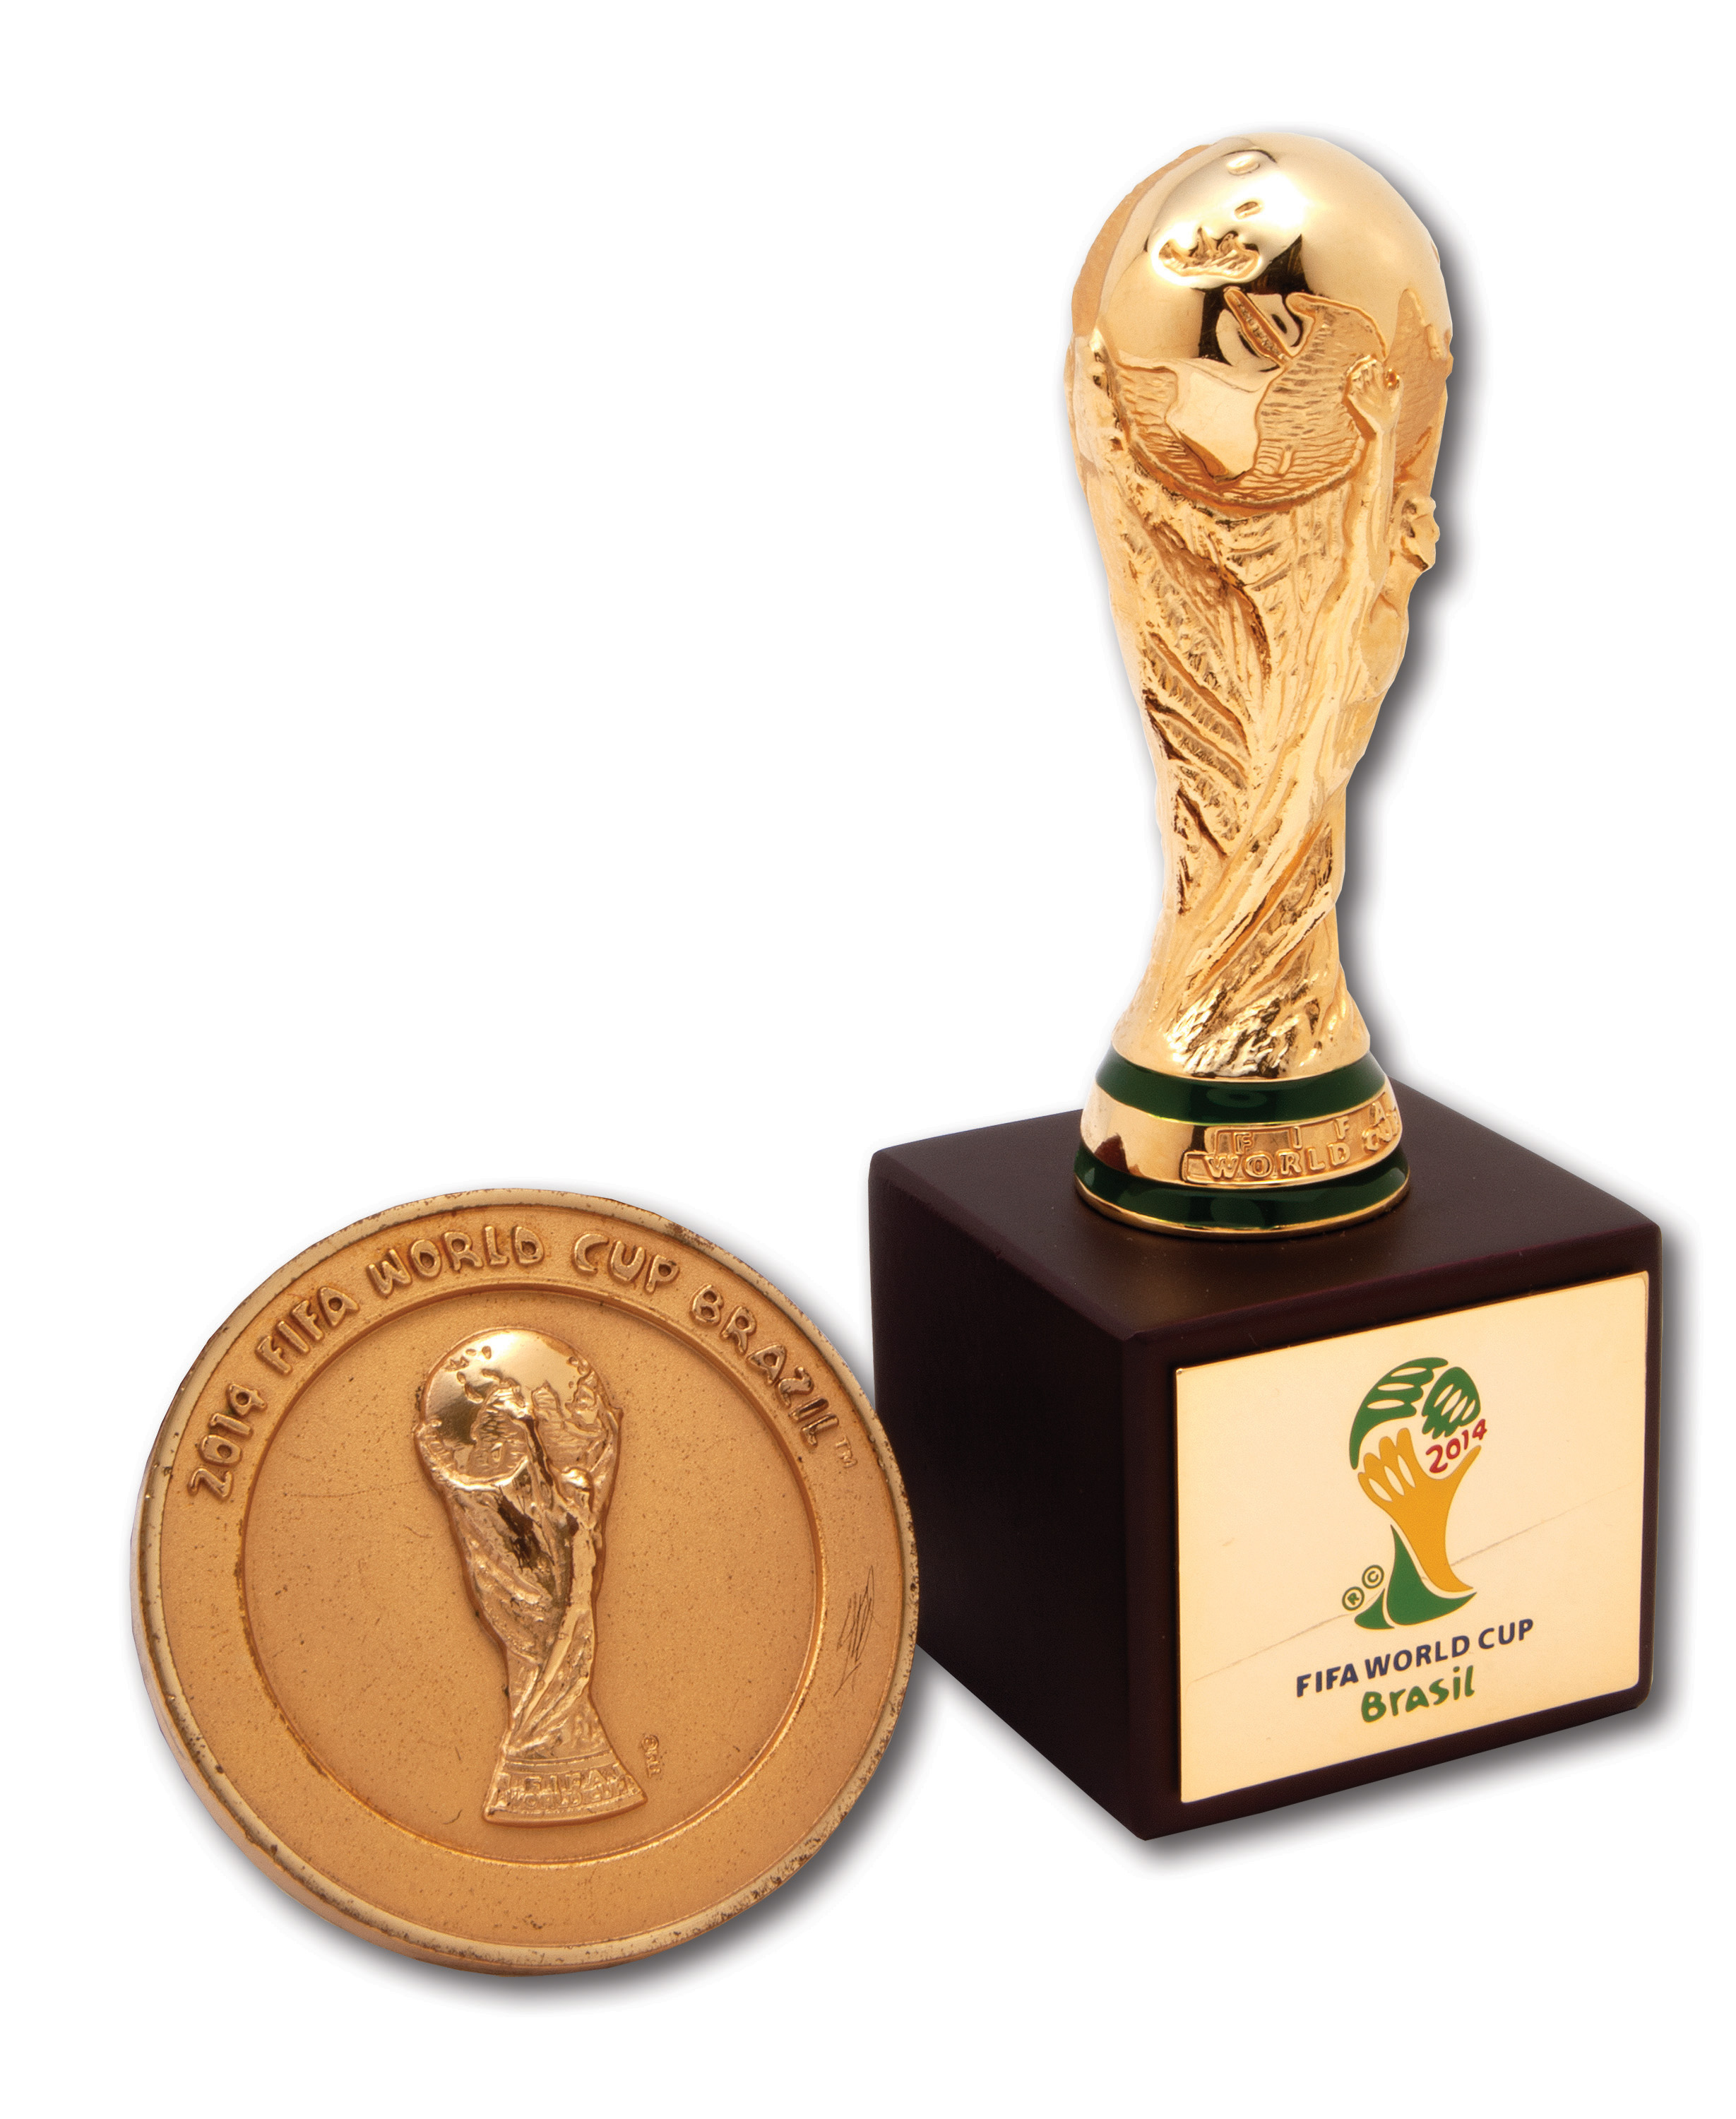 HQ 2014 Brazil FIFA World cup Champion Gold Medal Ribbon Collection XMAS Gift 